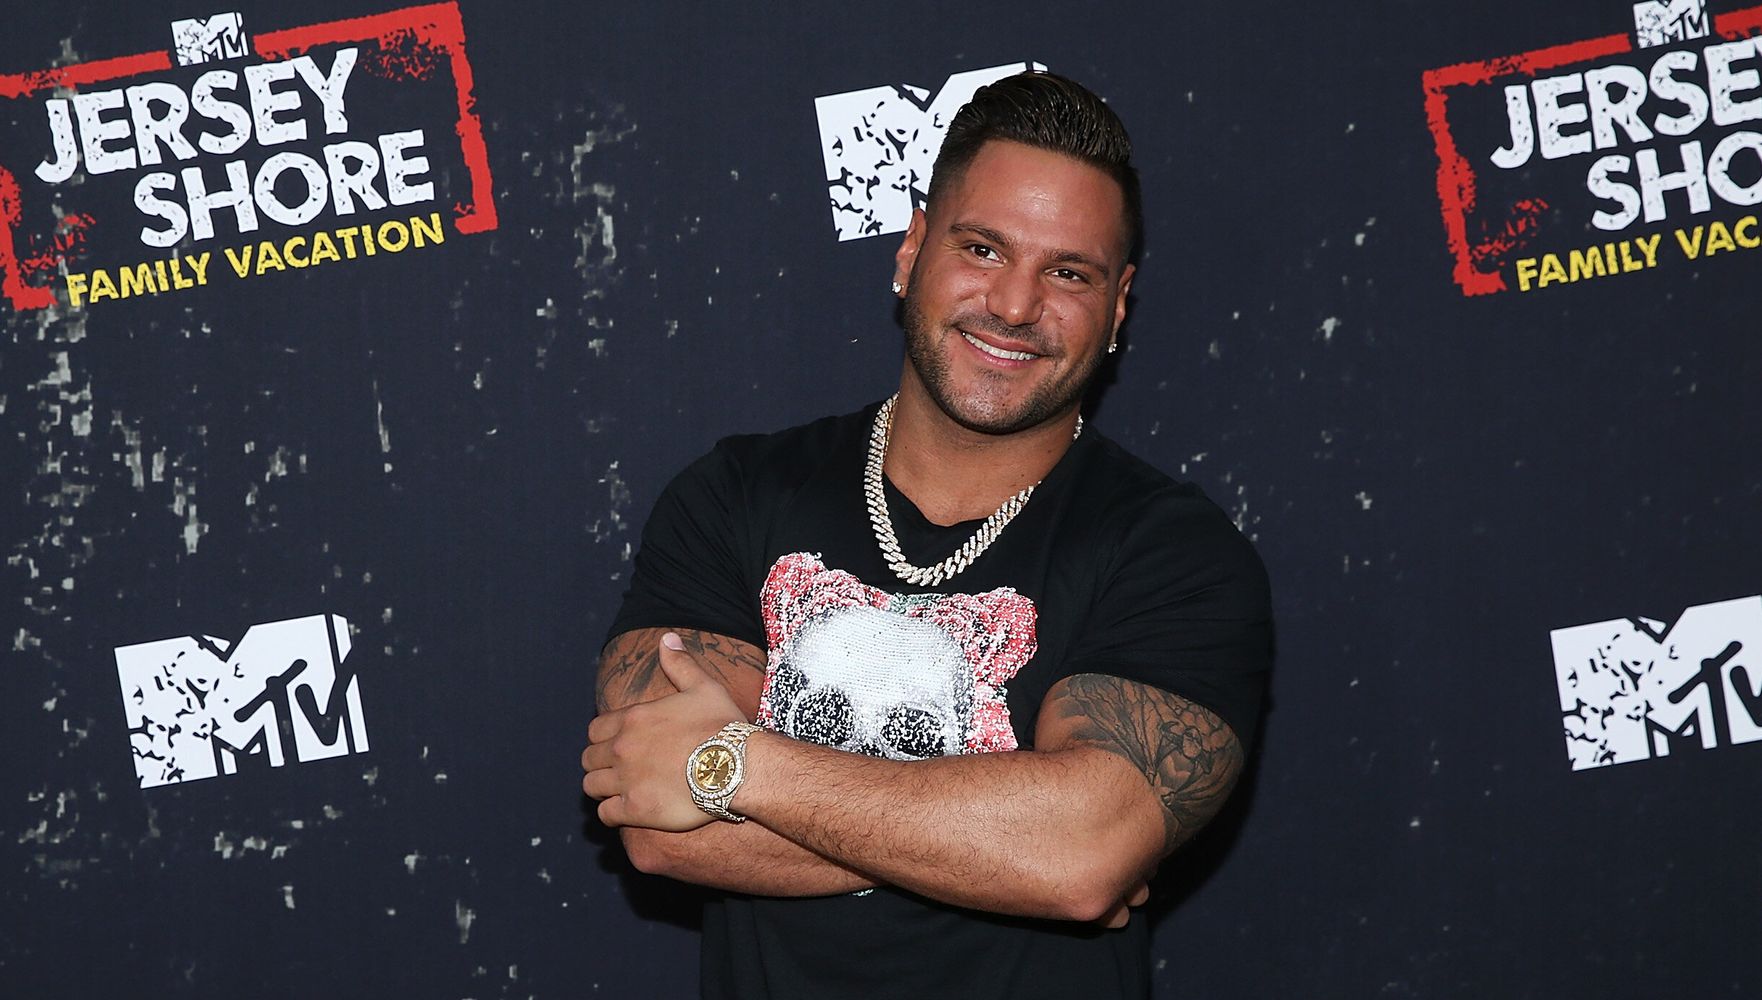 'Jersey Shore' Star Arrested An Domestic Violence Allegation